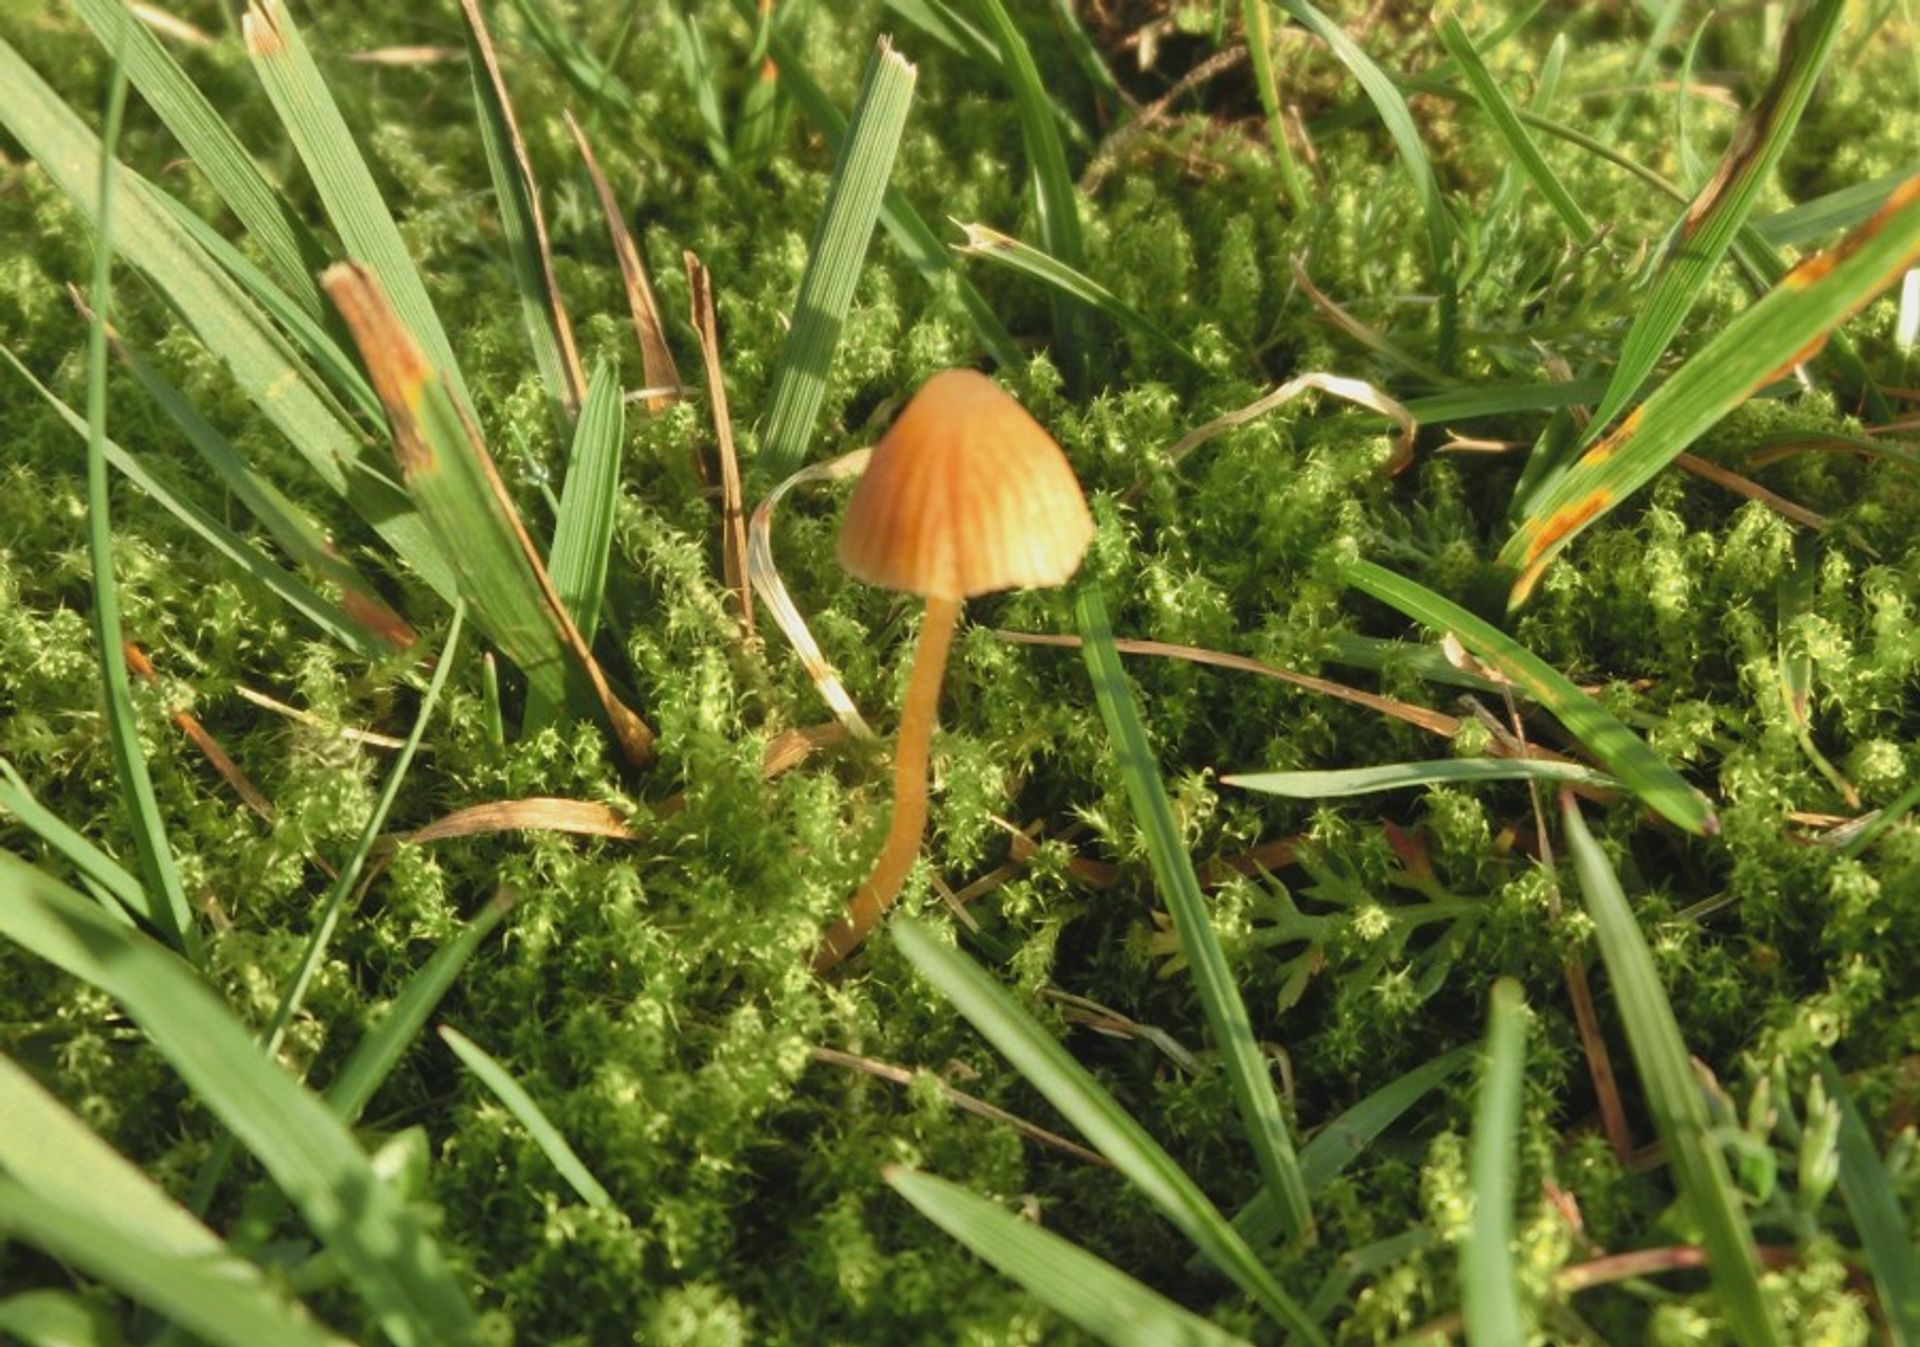 A small golden mushroom growing from the soil in the green forest of Sweden during a sunny day.